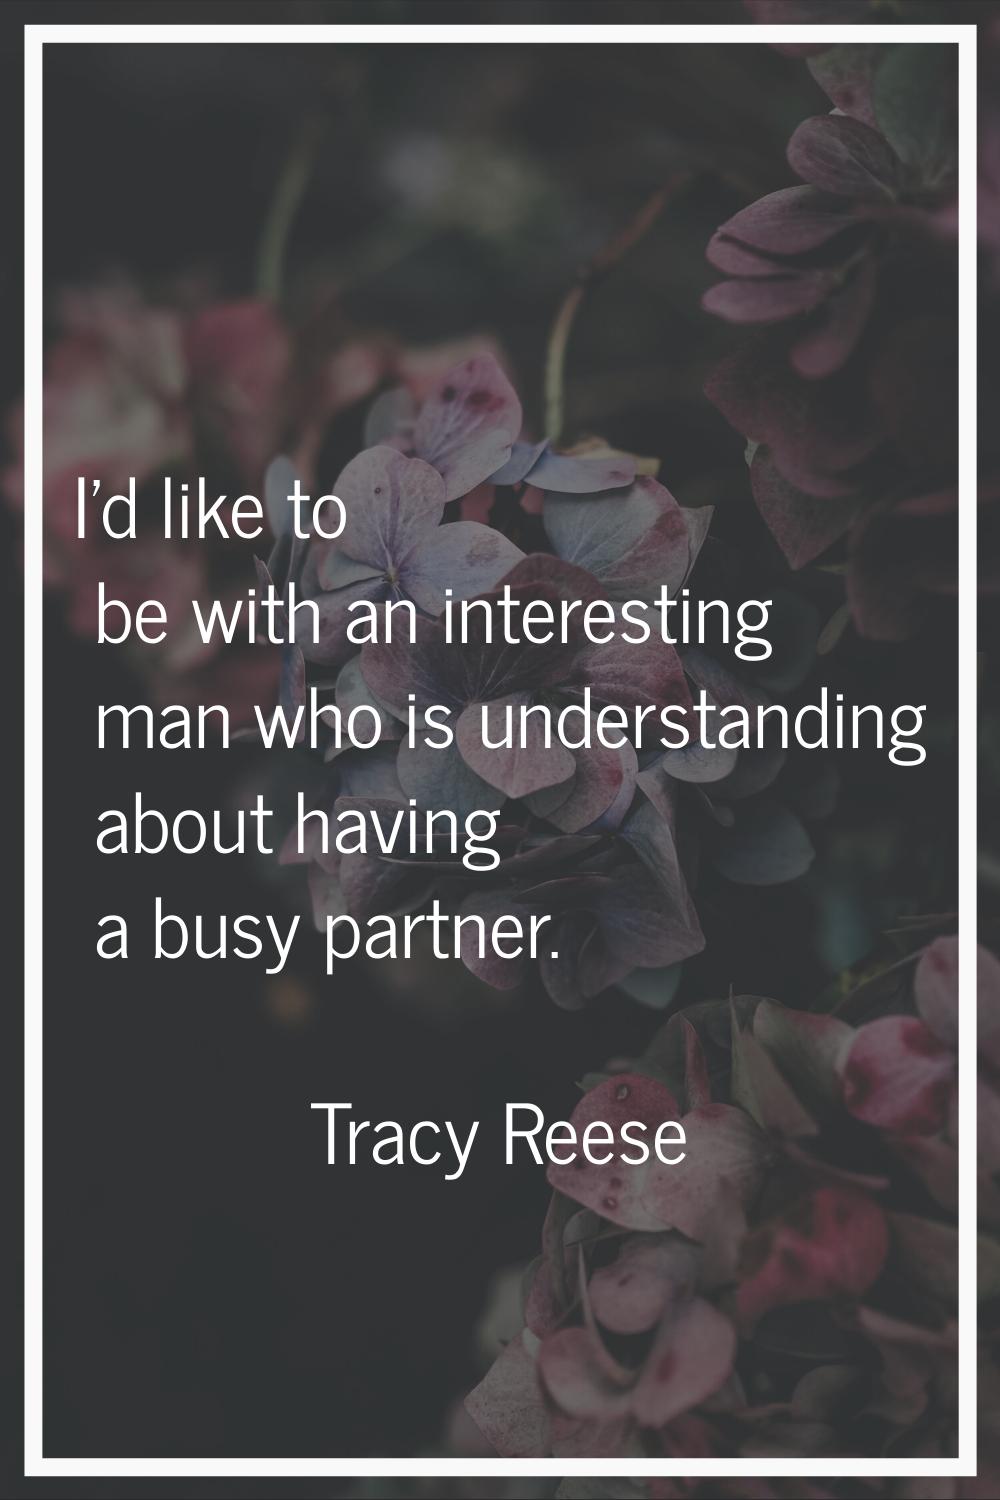 I'd like to be with an interesting man who is understanding about having a busy partner.